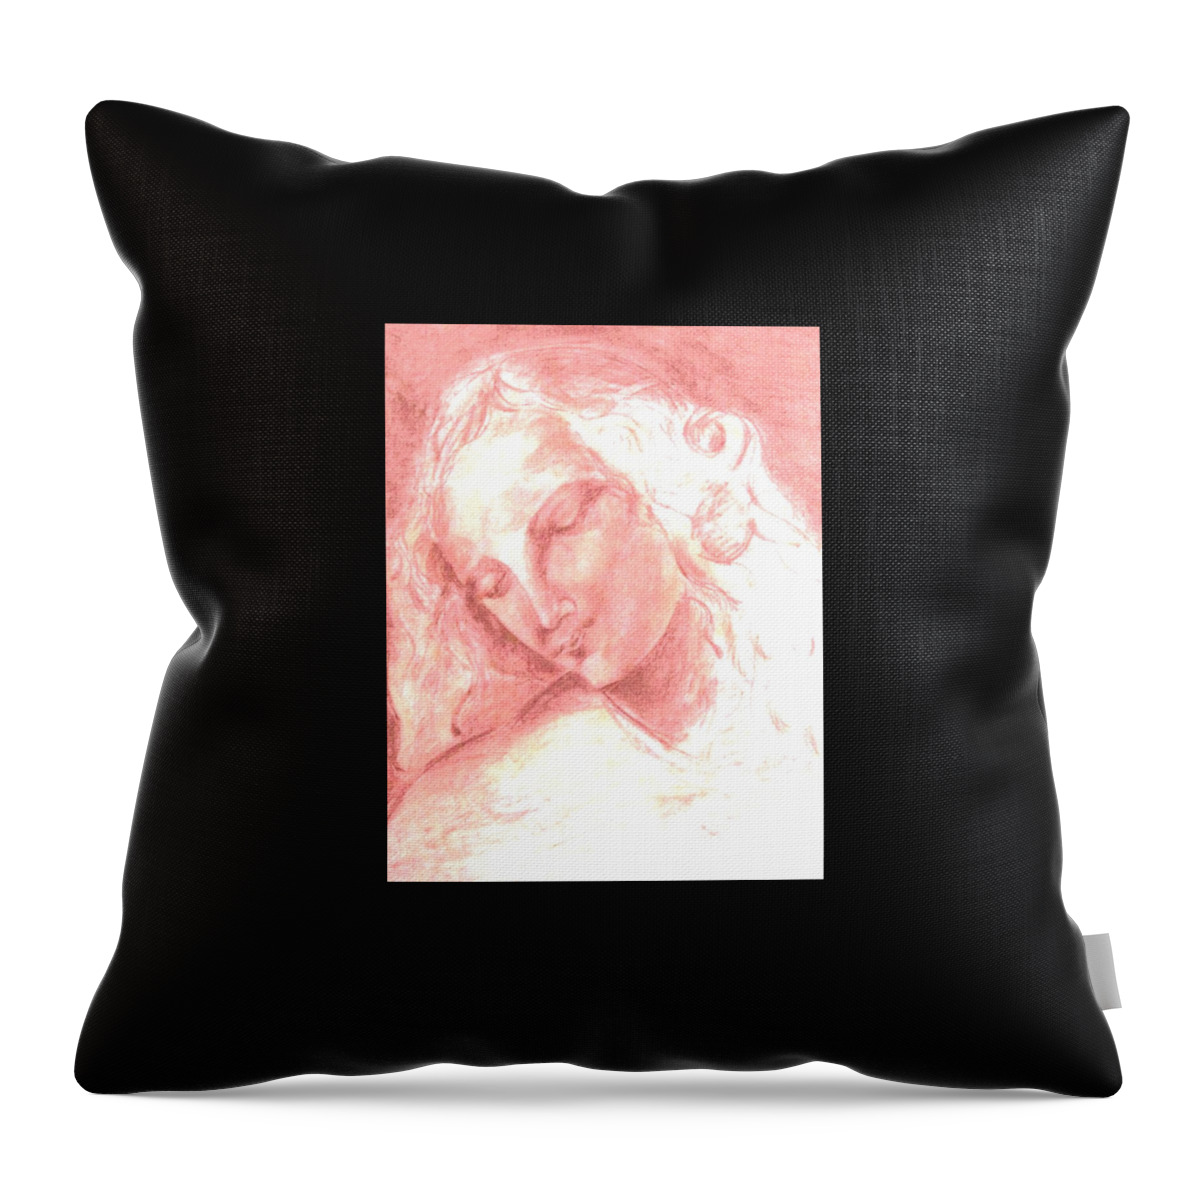 Portrait Throw Pillow featuring the painting Blonde by Dawn Caravetta Fisher